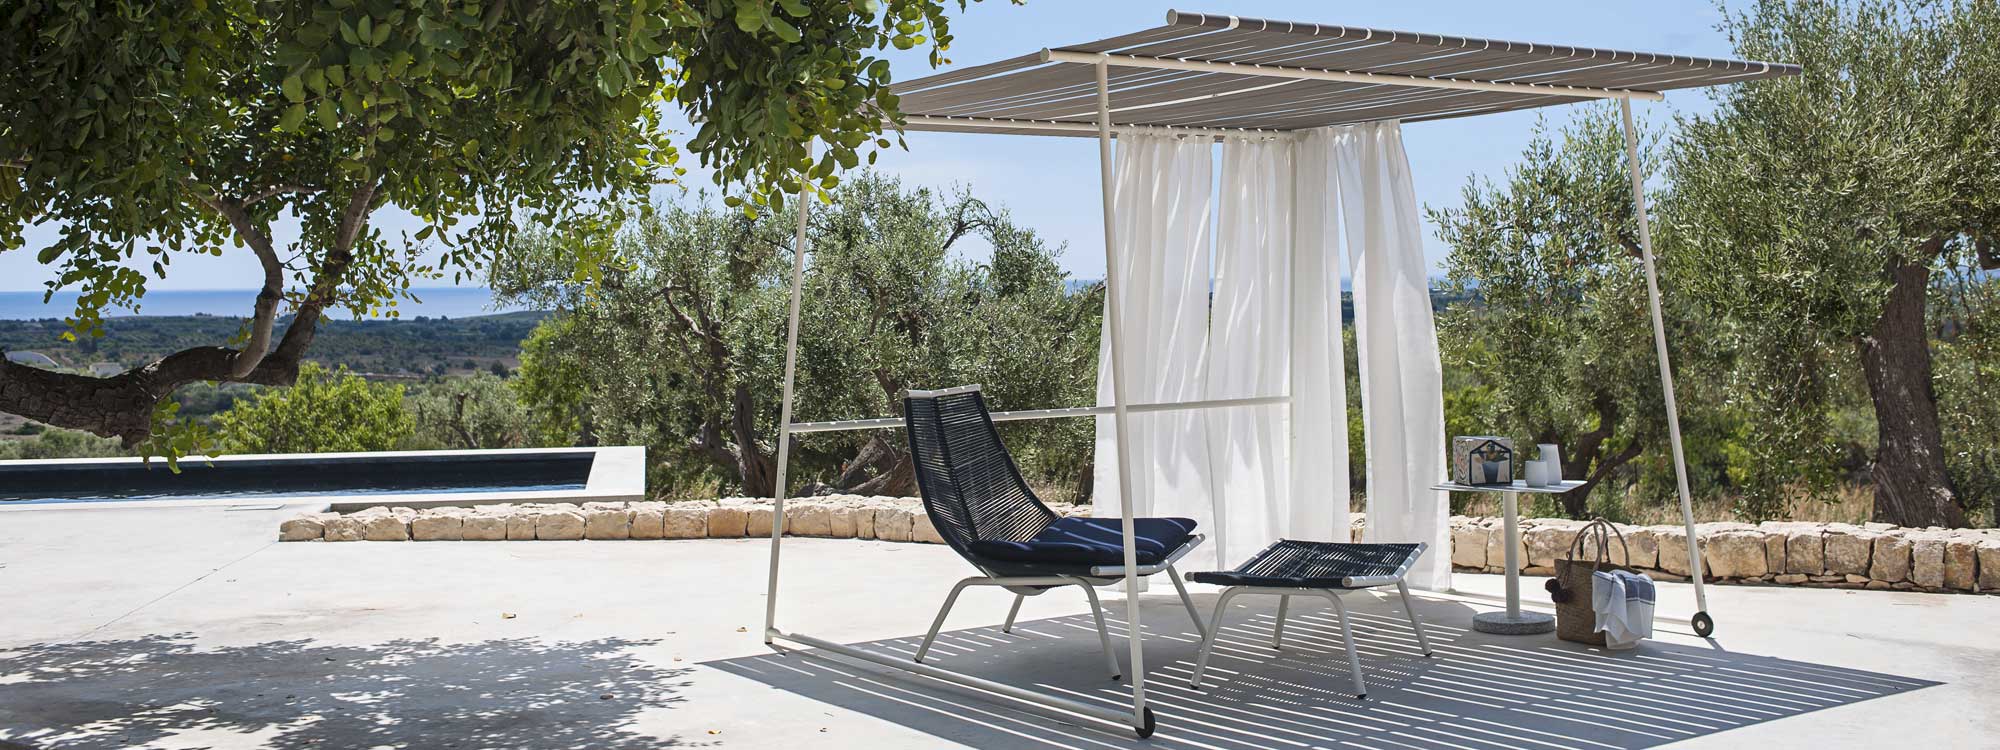 Image of milk-colored Ombrina modern pergola and Laze garden chair and foot rest by RODA, shown on sunny Italian terrace